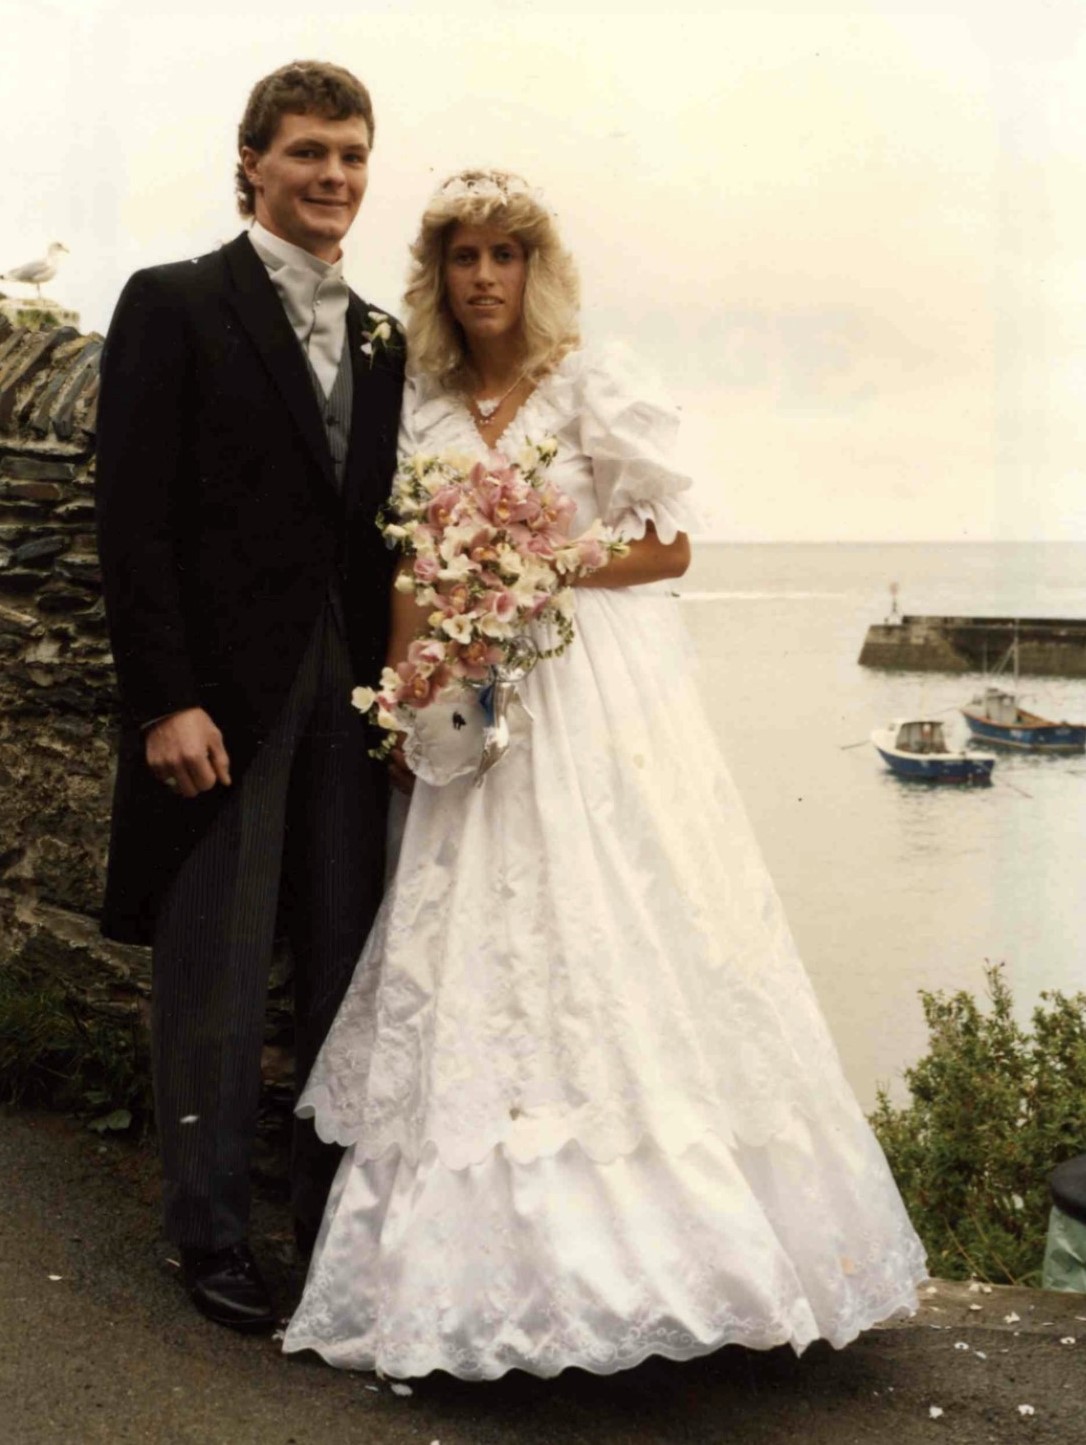 The marriage of Julie & Peter Lobb, 1988